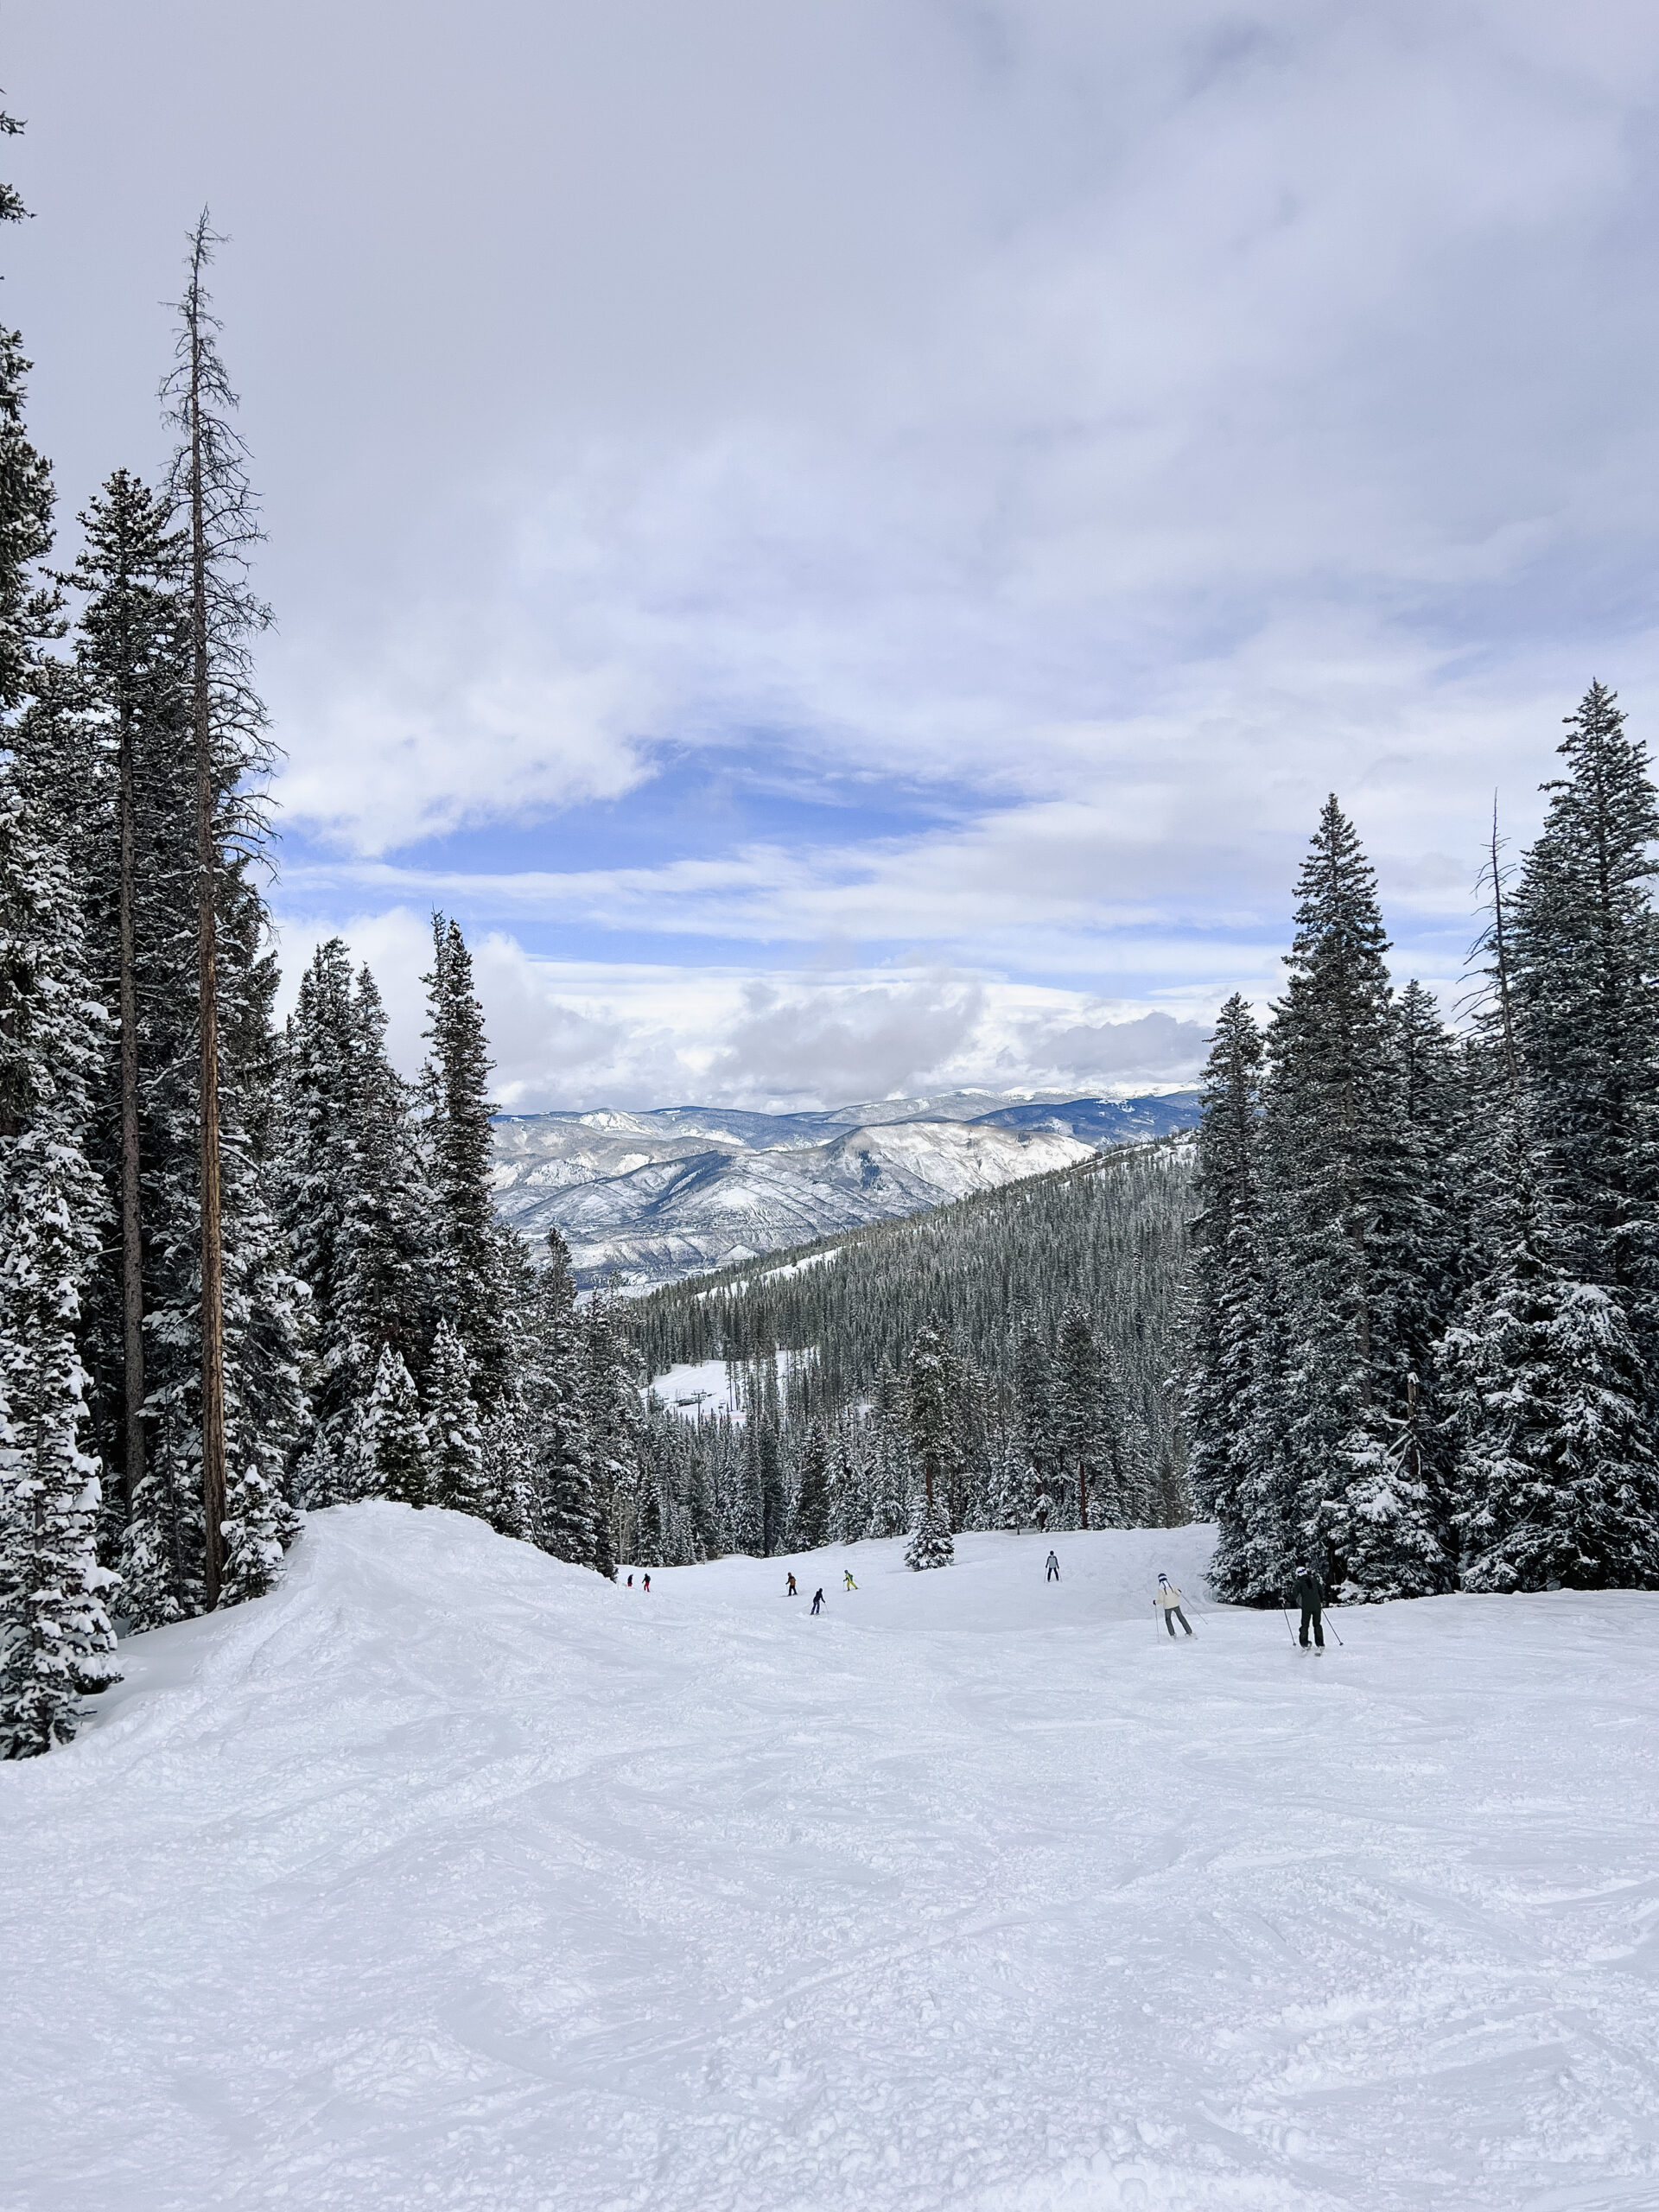 views from the top a run at my favorite mountain of the four at Aspen Snowmass - Snowmass! #skisnowmass #theldltravels #familyskitrip